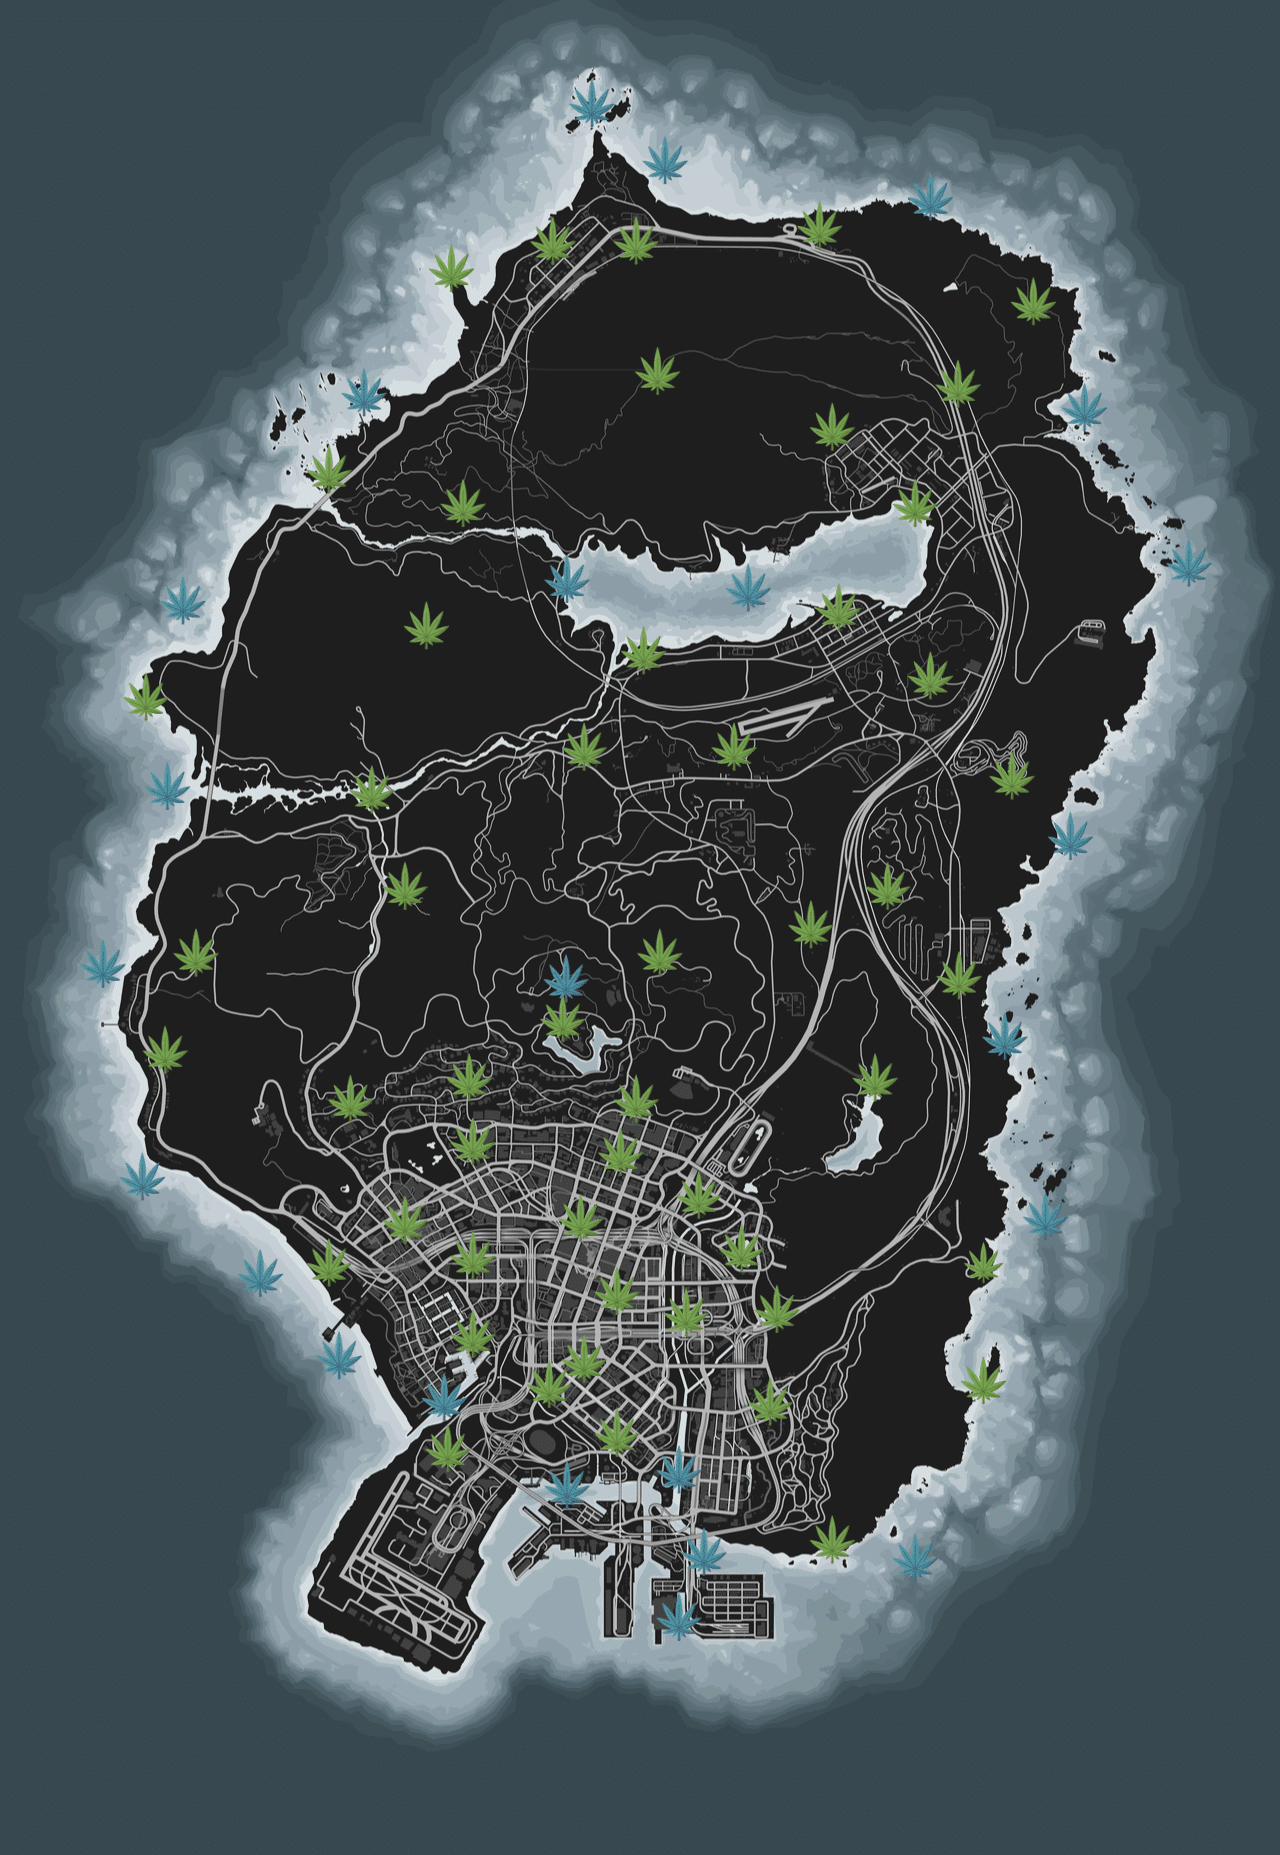 All land and water Peyote Plant locations in GTA Online.